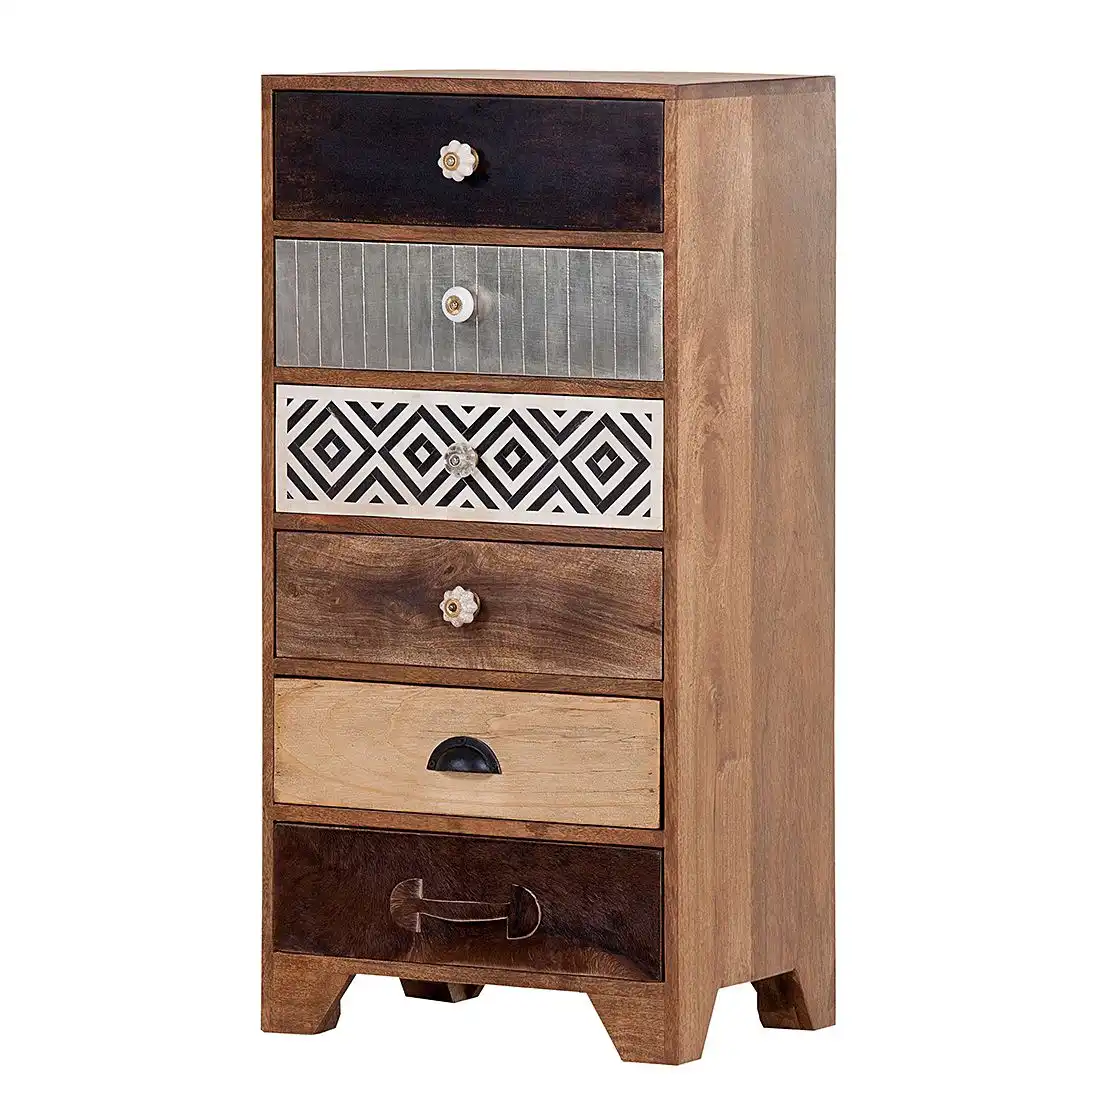 Mango wood Drawers Chest with 6 drawers - popular handicrafts